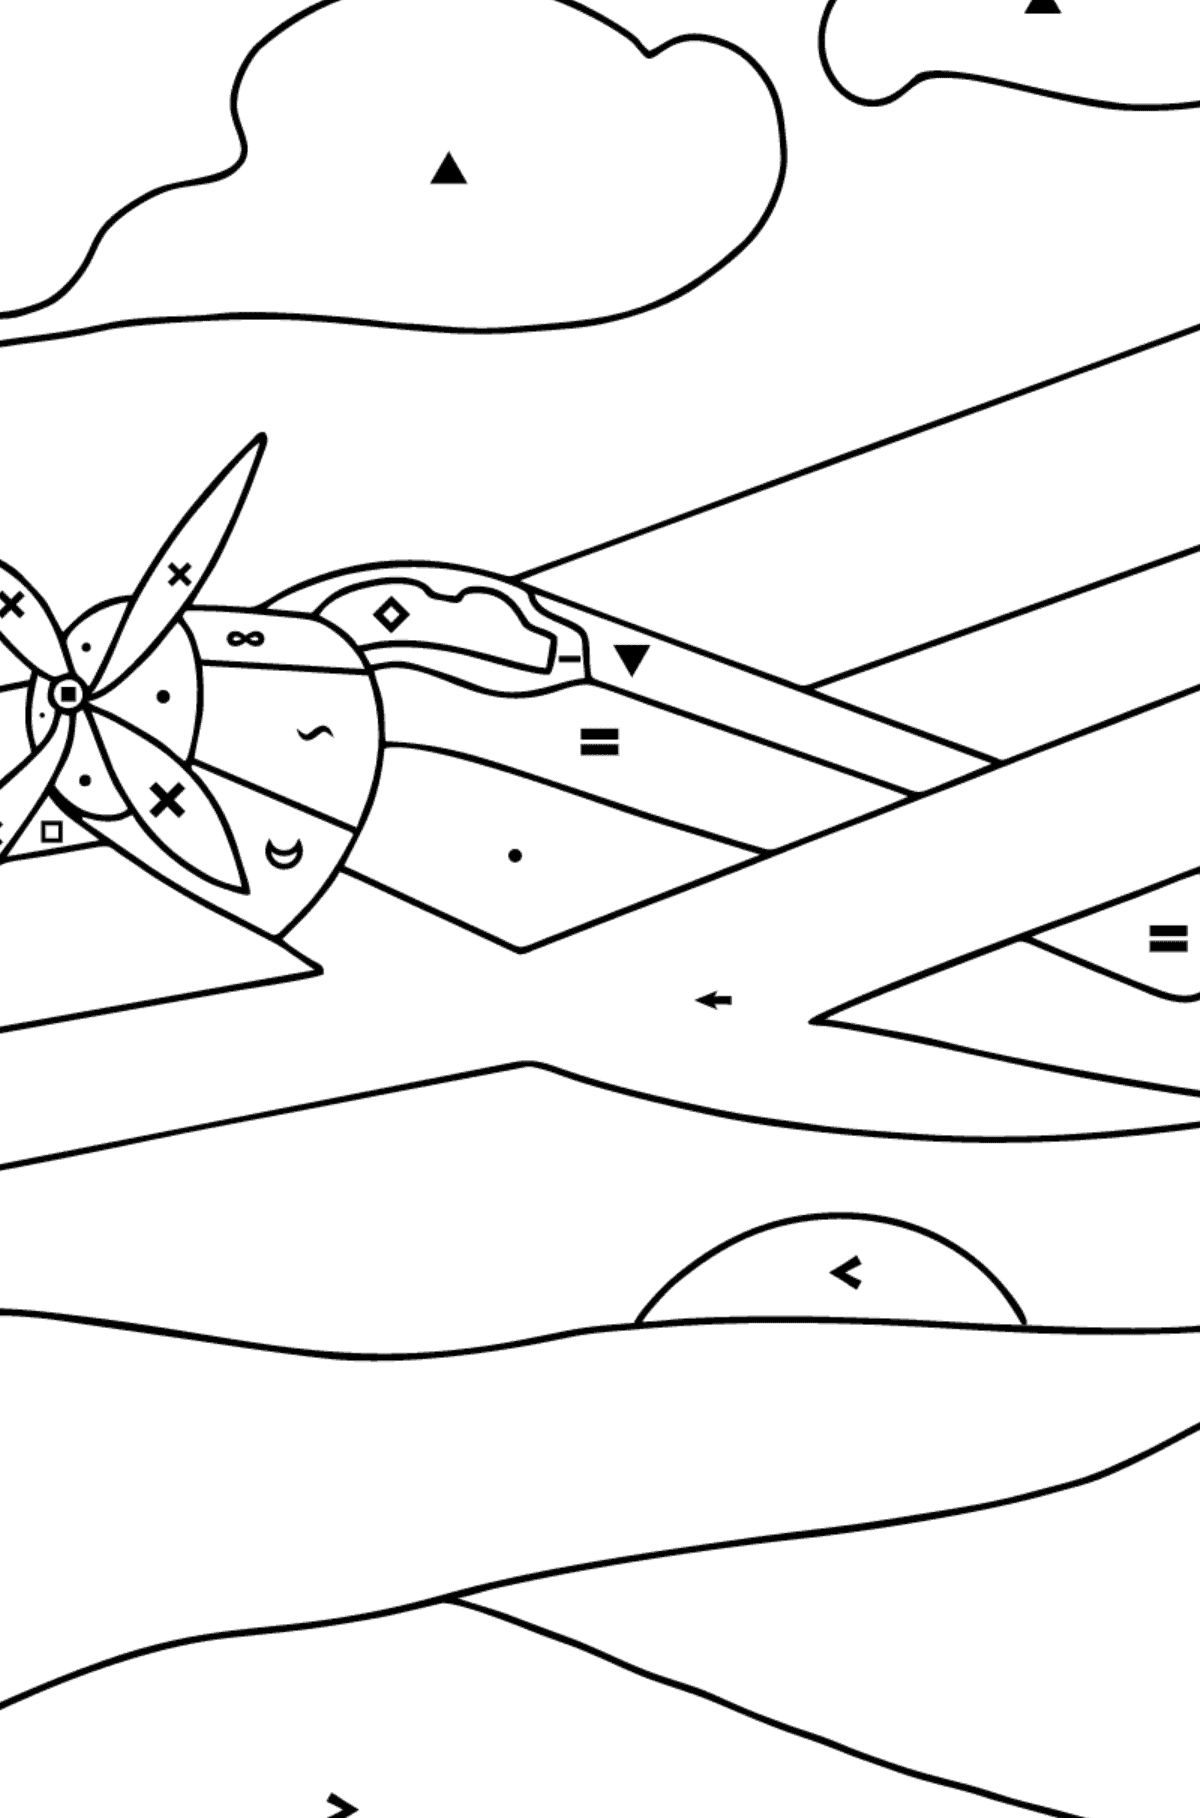 Coloring Page - A Biplane - Coloring by Symbols for Children